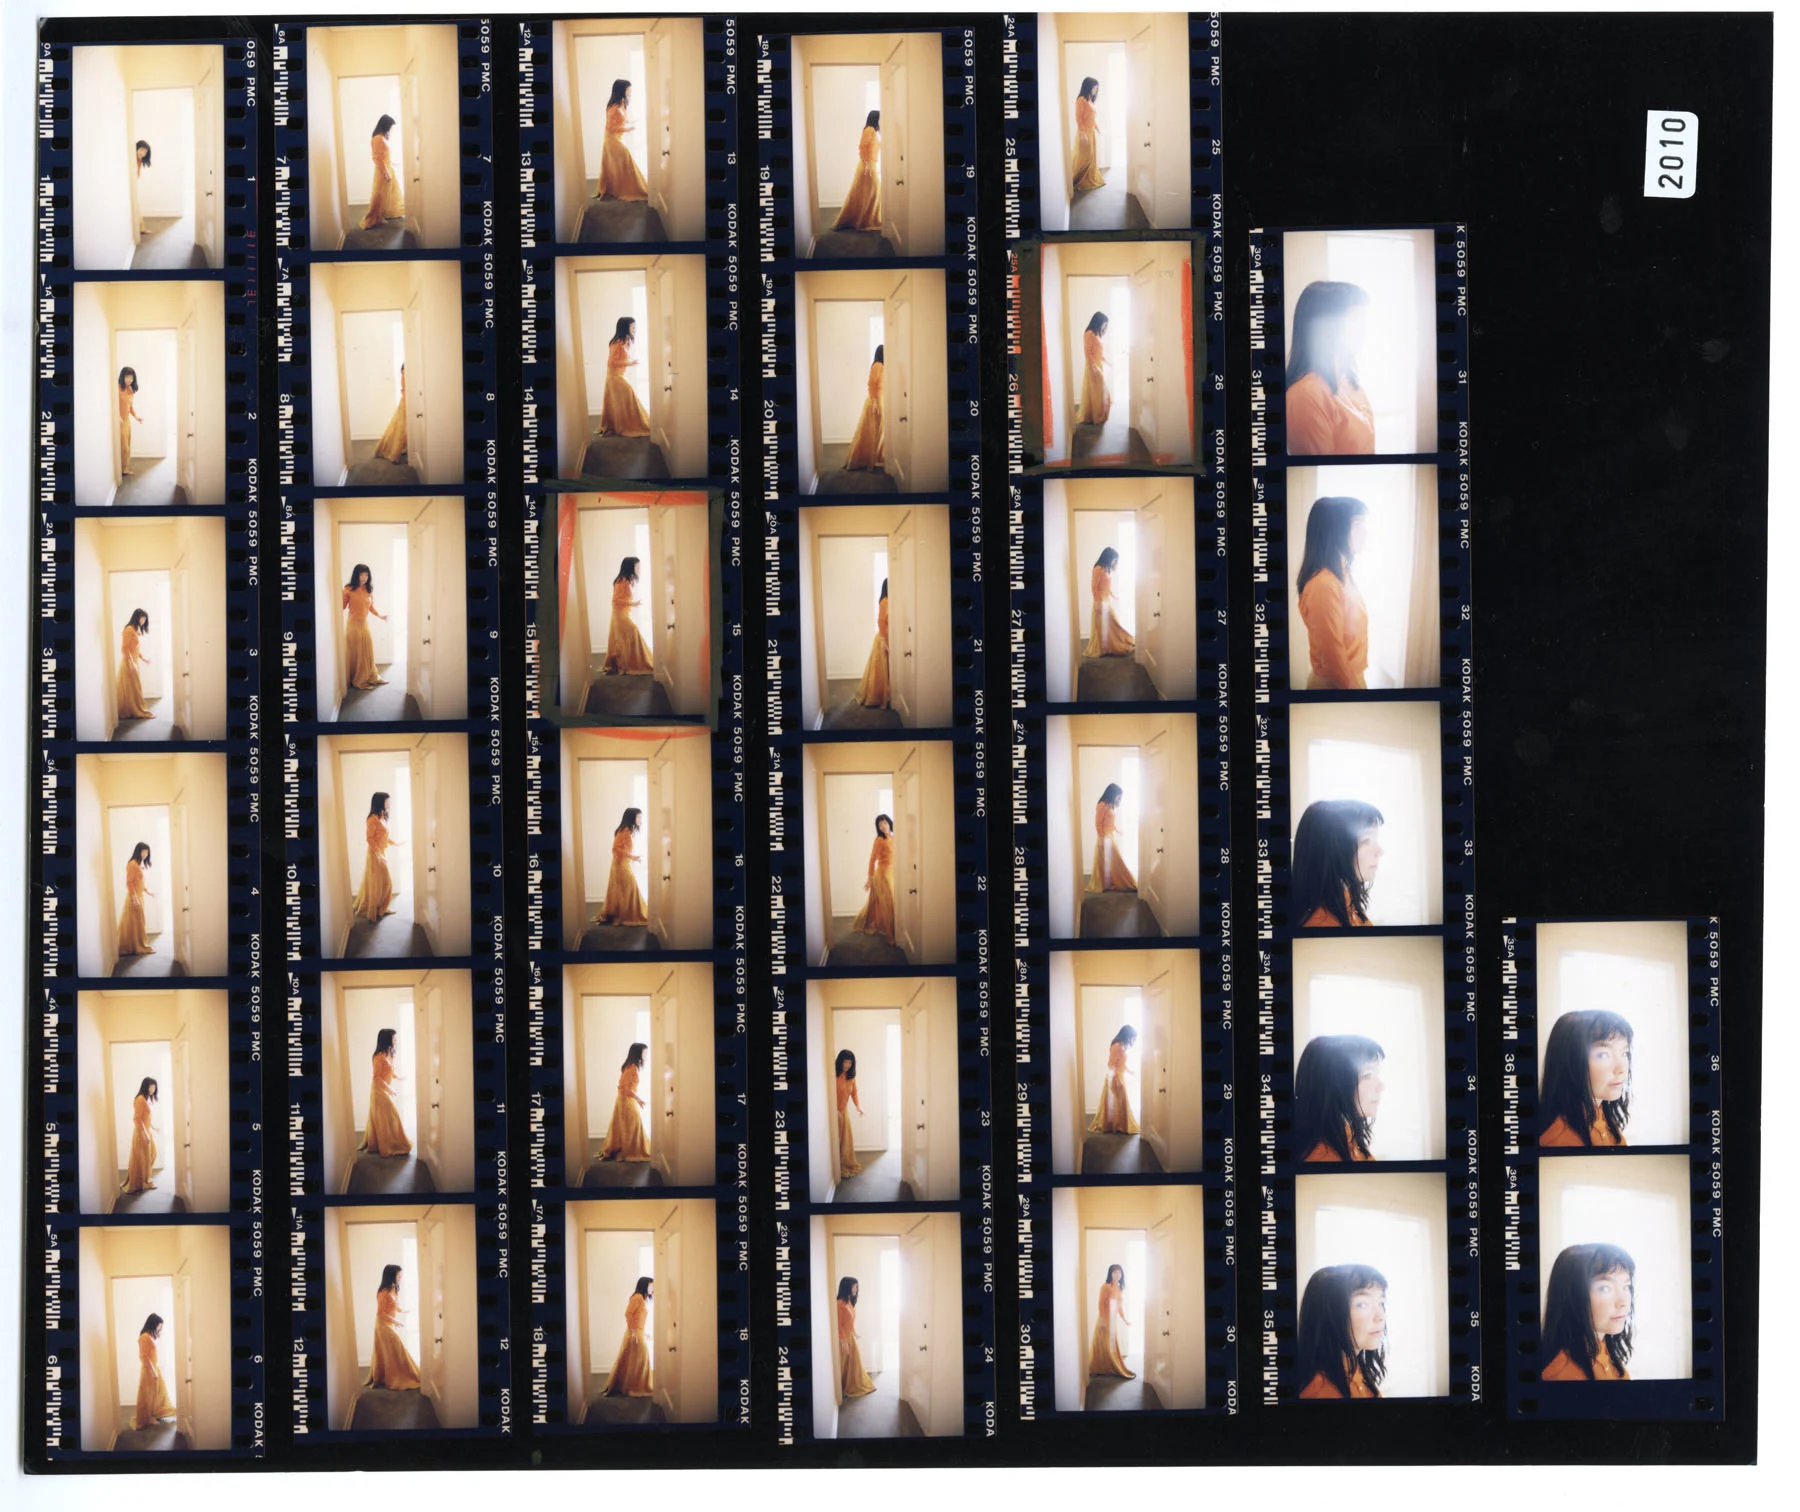 Scan of a photographic contact sheet showing multiple photographs of the musician Björk, a young, dark-haired woman dressed in an orange dress, who’s shown exploring the white hallways and rooms of a hotel.